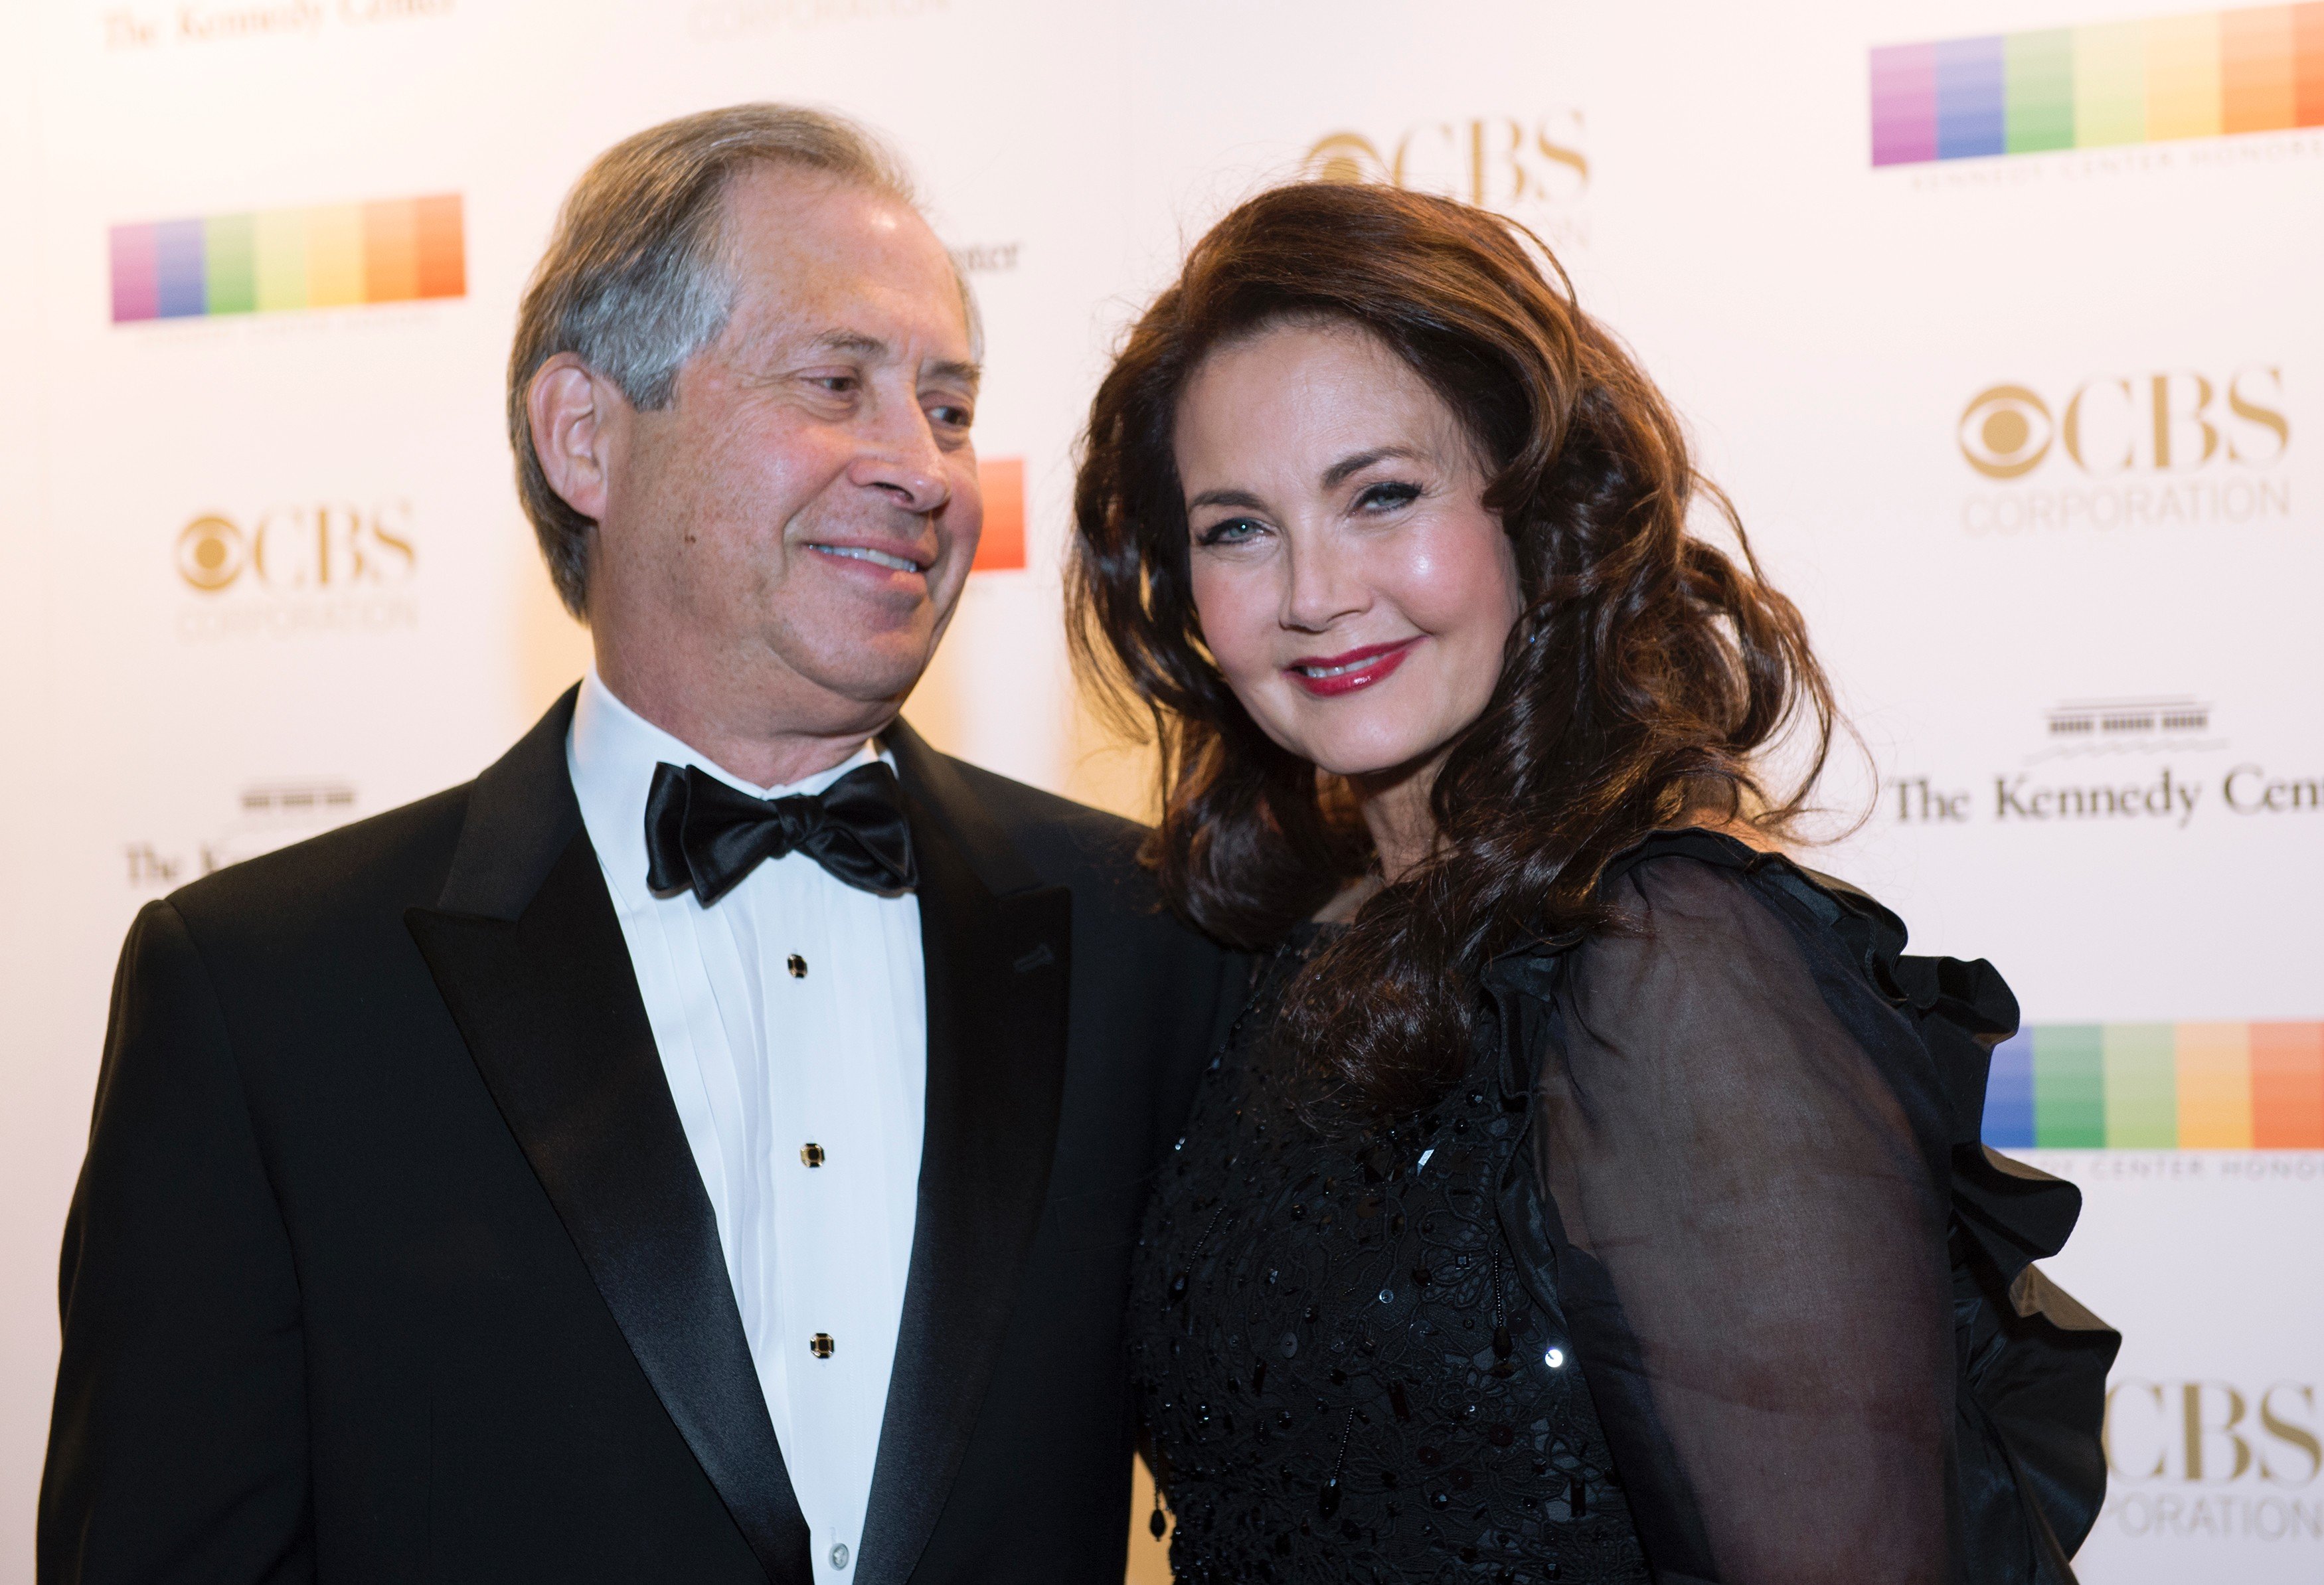 Lynda Carter and her late husband, Robert Altman, pictured at the 38th Annual Kennedy Center Honors, 2015, Washington, DC. | Source: Getting Images